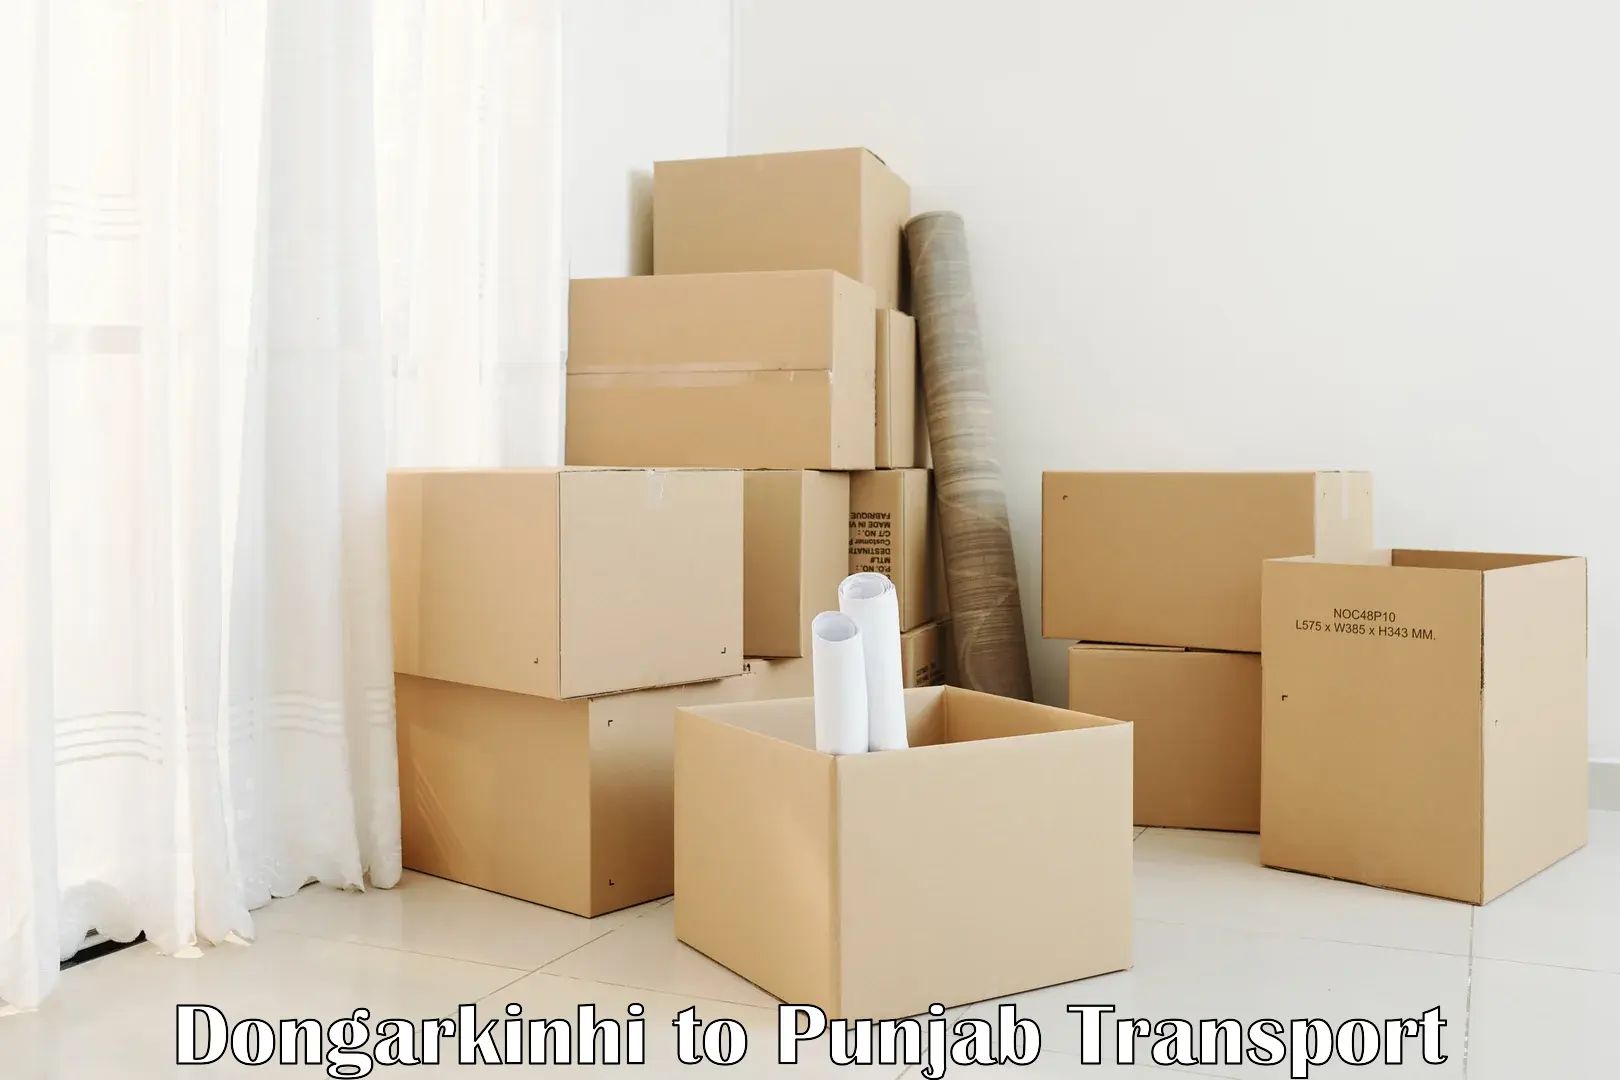 Container transportation services Dongarkinhi to Anandpur Sahib